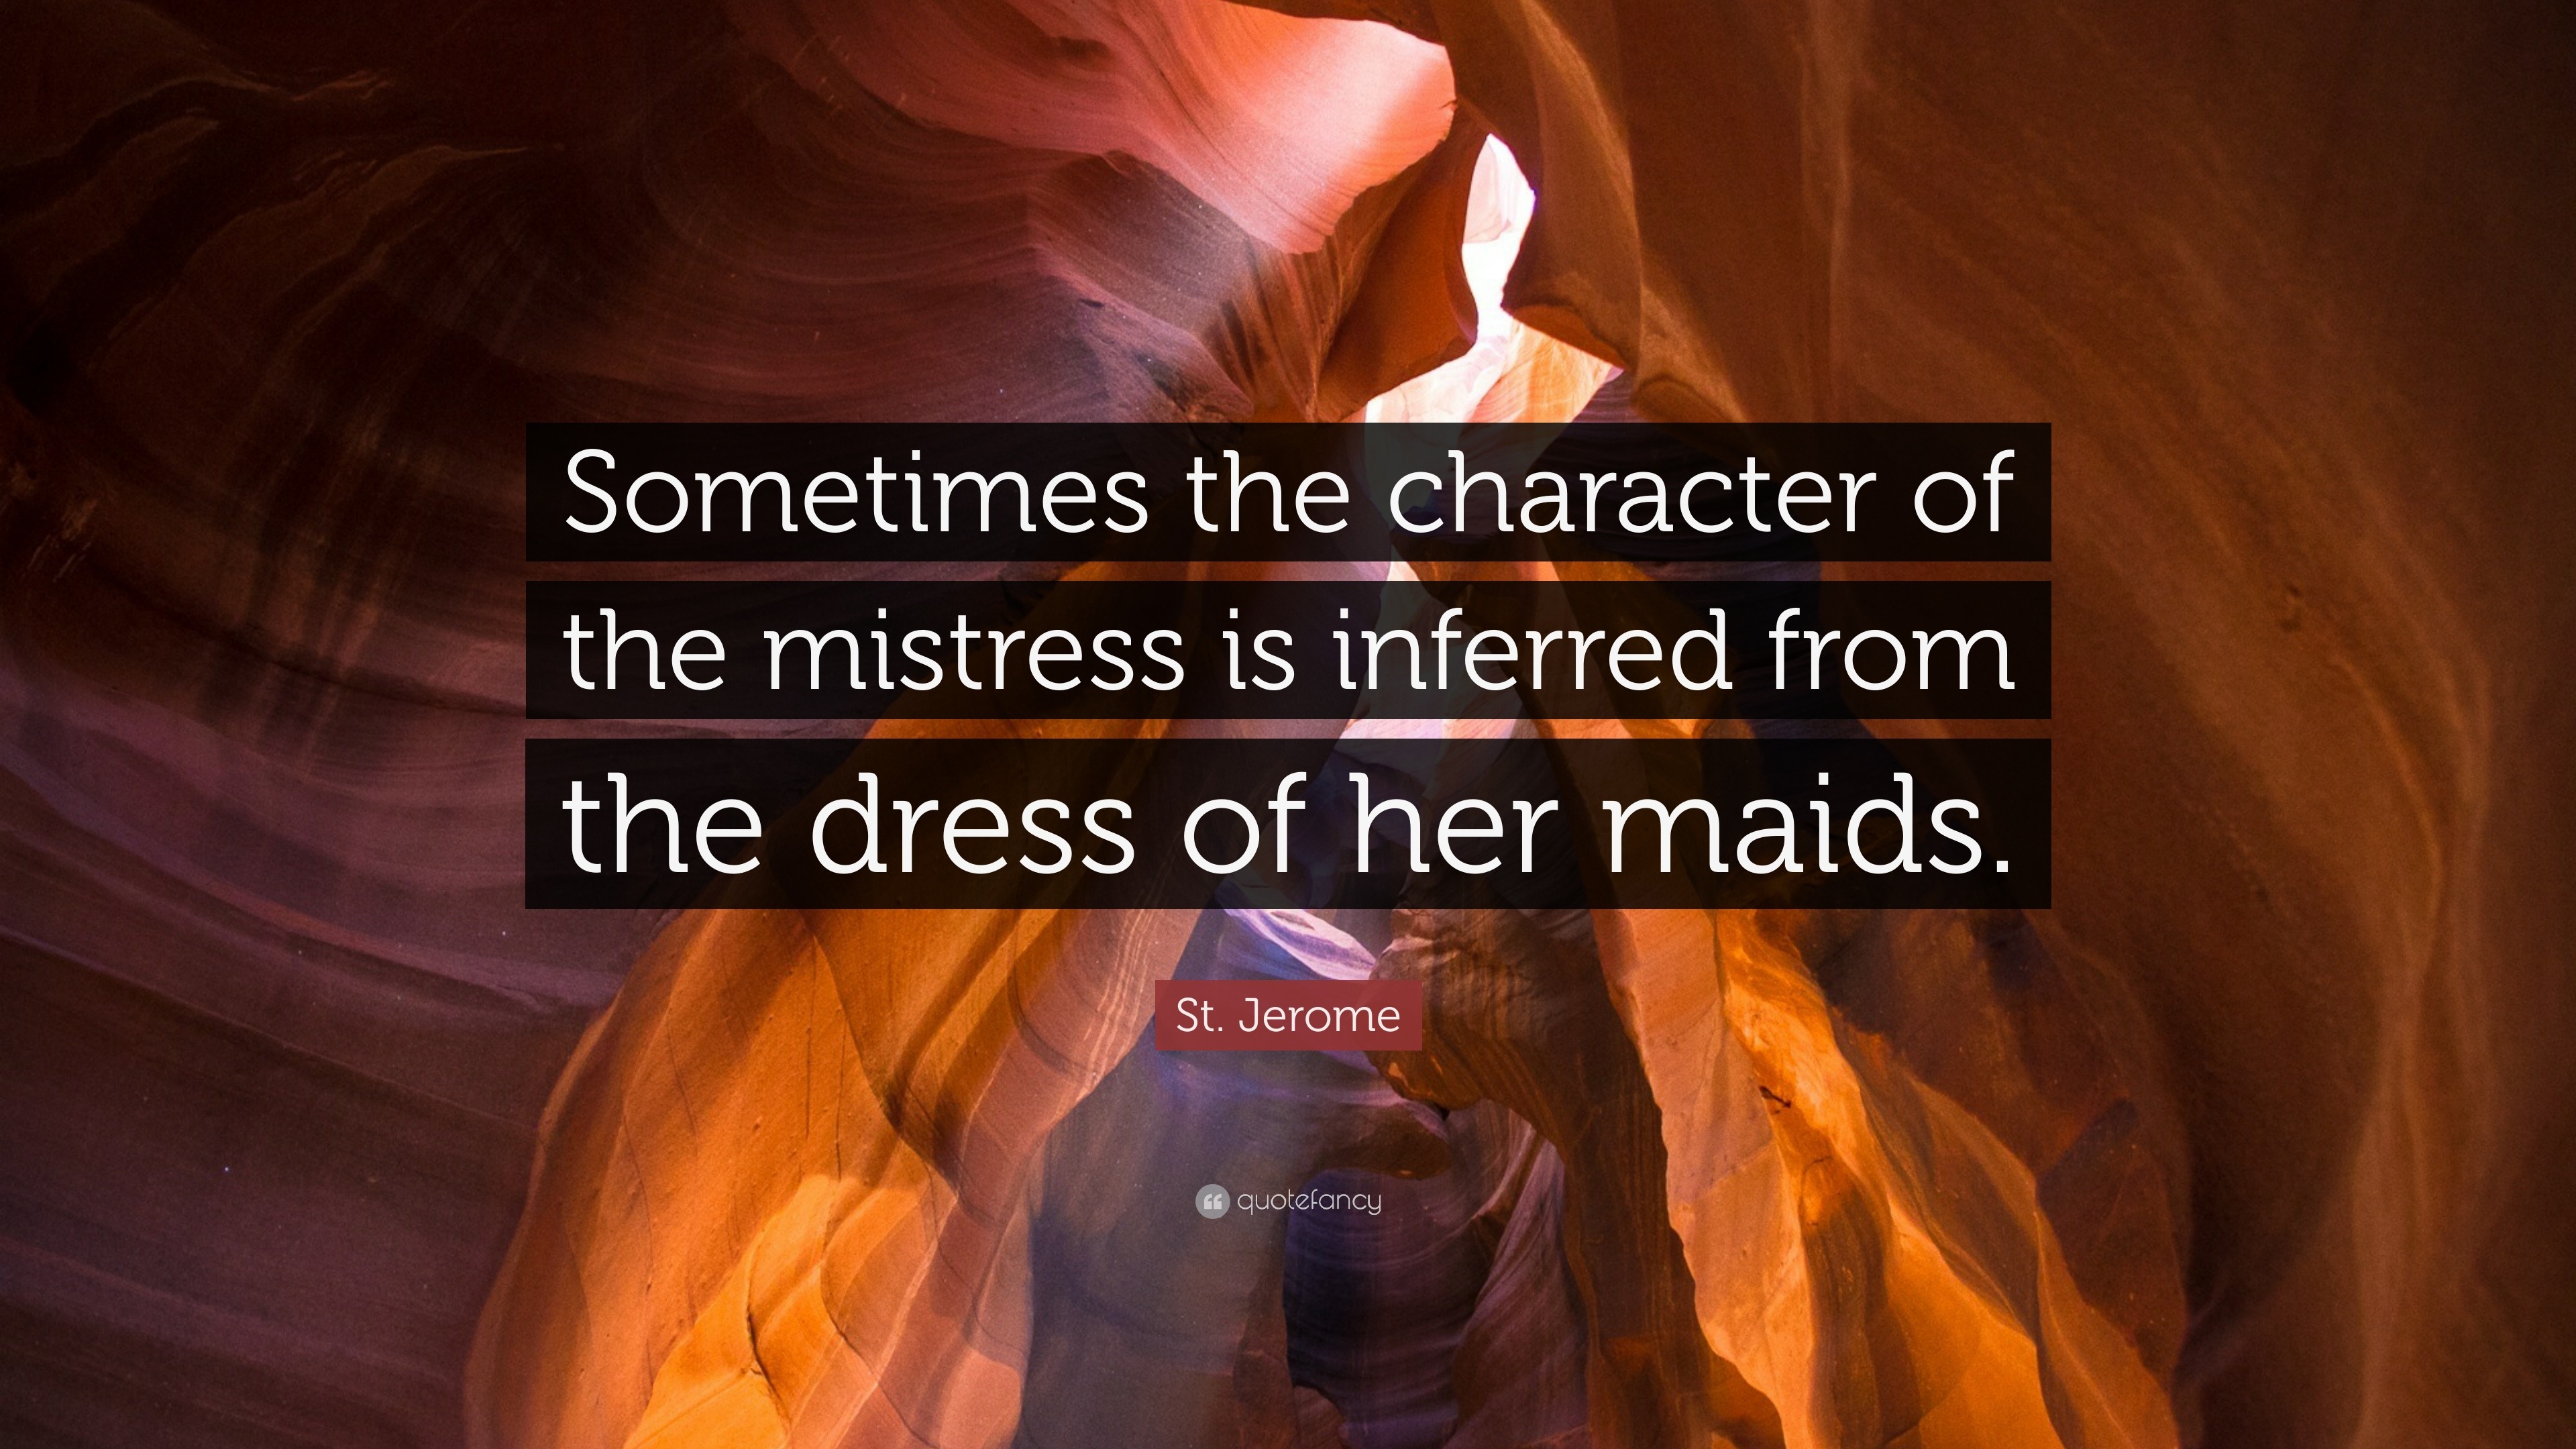 St. Jerome Quote: “Sometimes the character of the mistress is